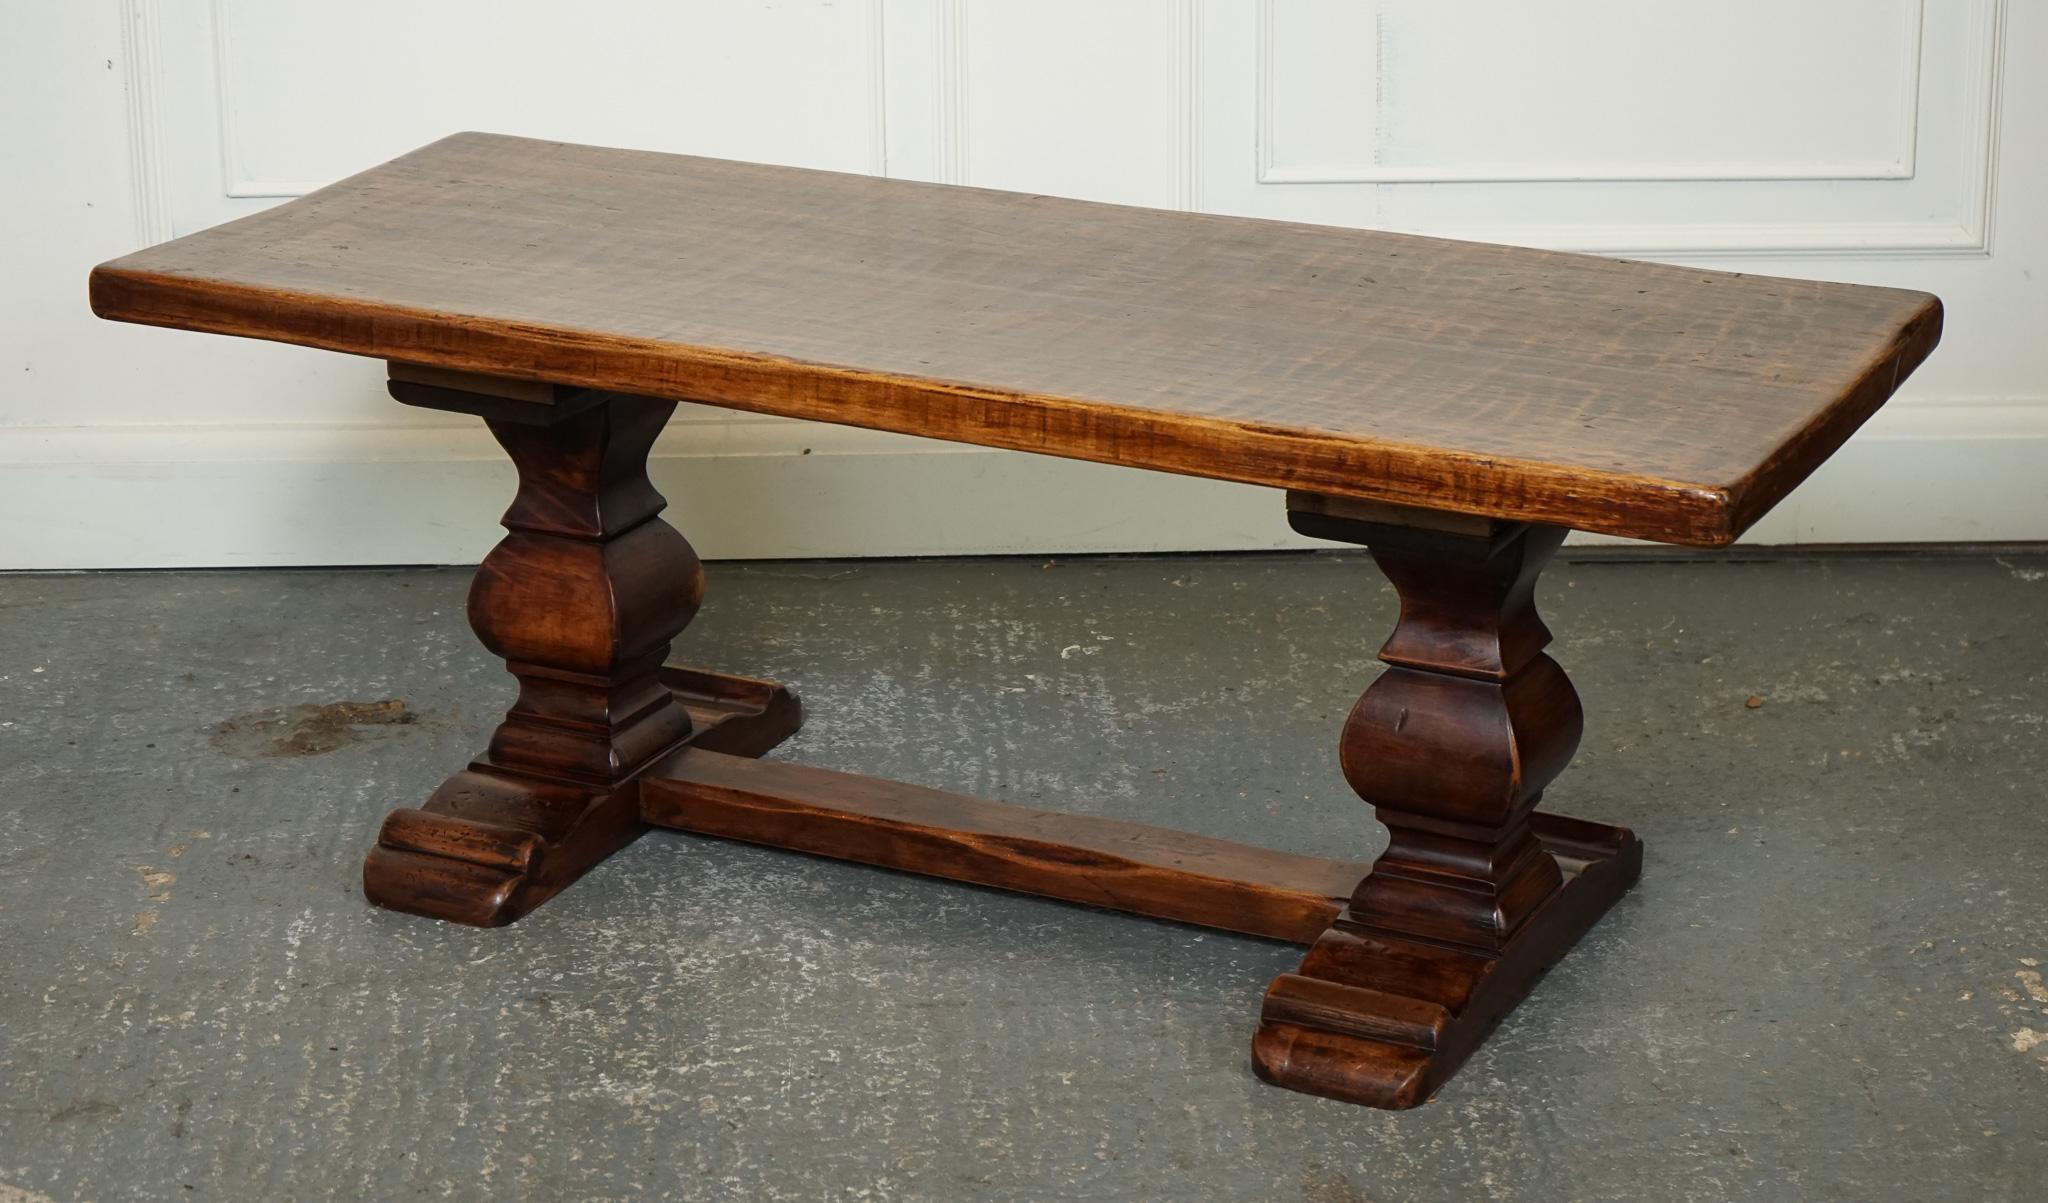 
We are delighted to offer for sale this Beautiful Vintage Refectory Coffee Table In The Style Of Robert 